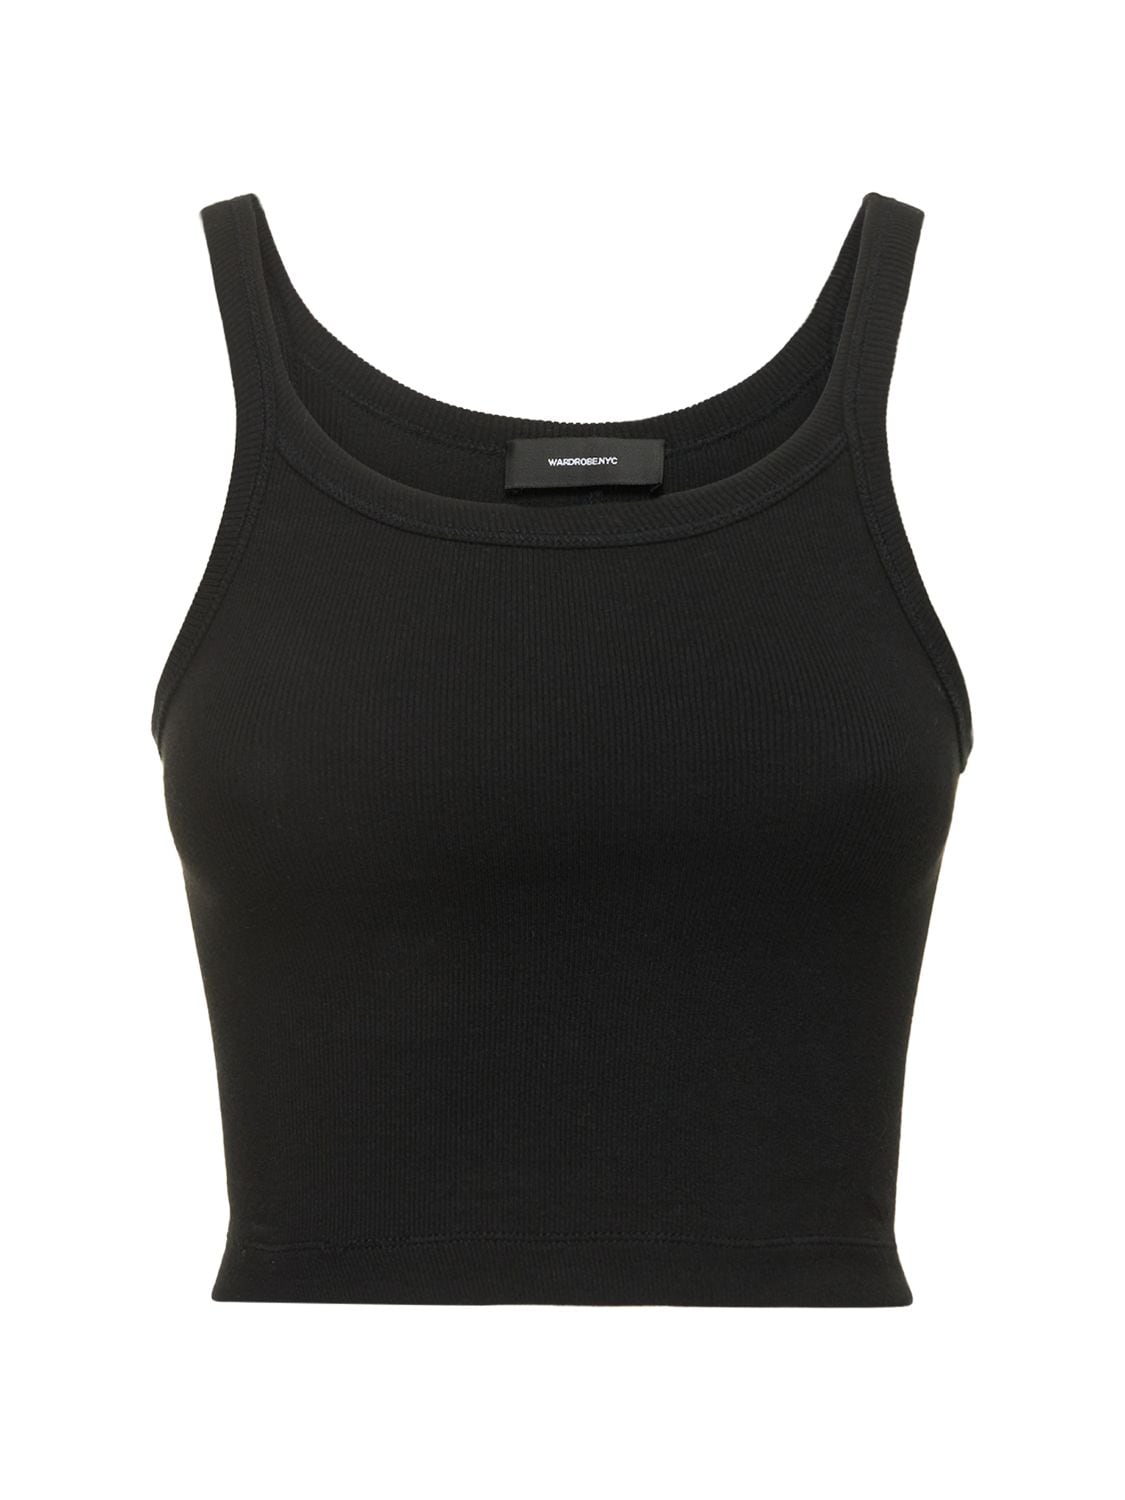 Image of Hailey Bieber Stretch Cotton Tank Top